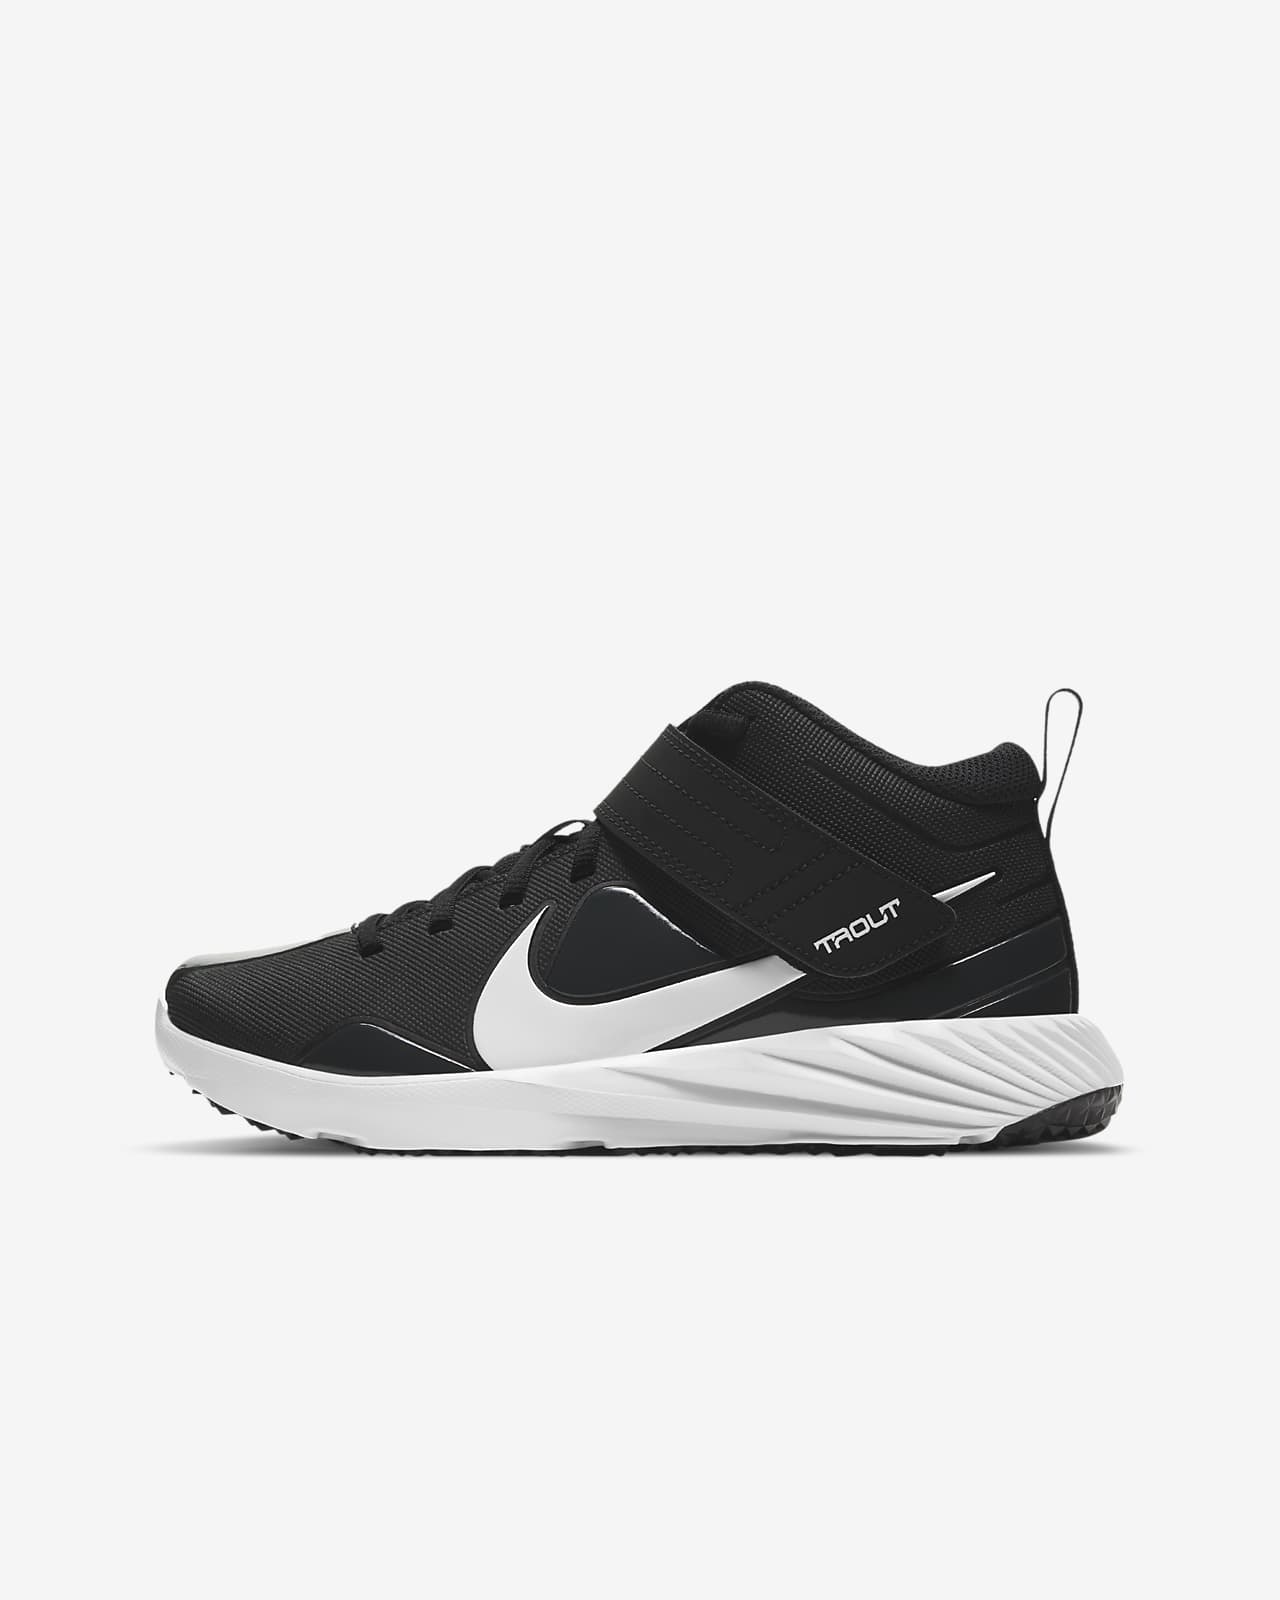 mike trout nike turf shoes